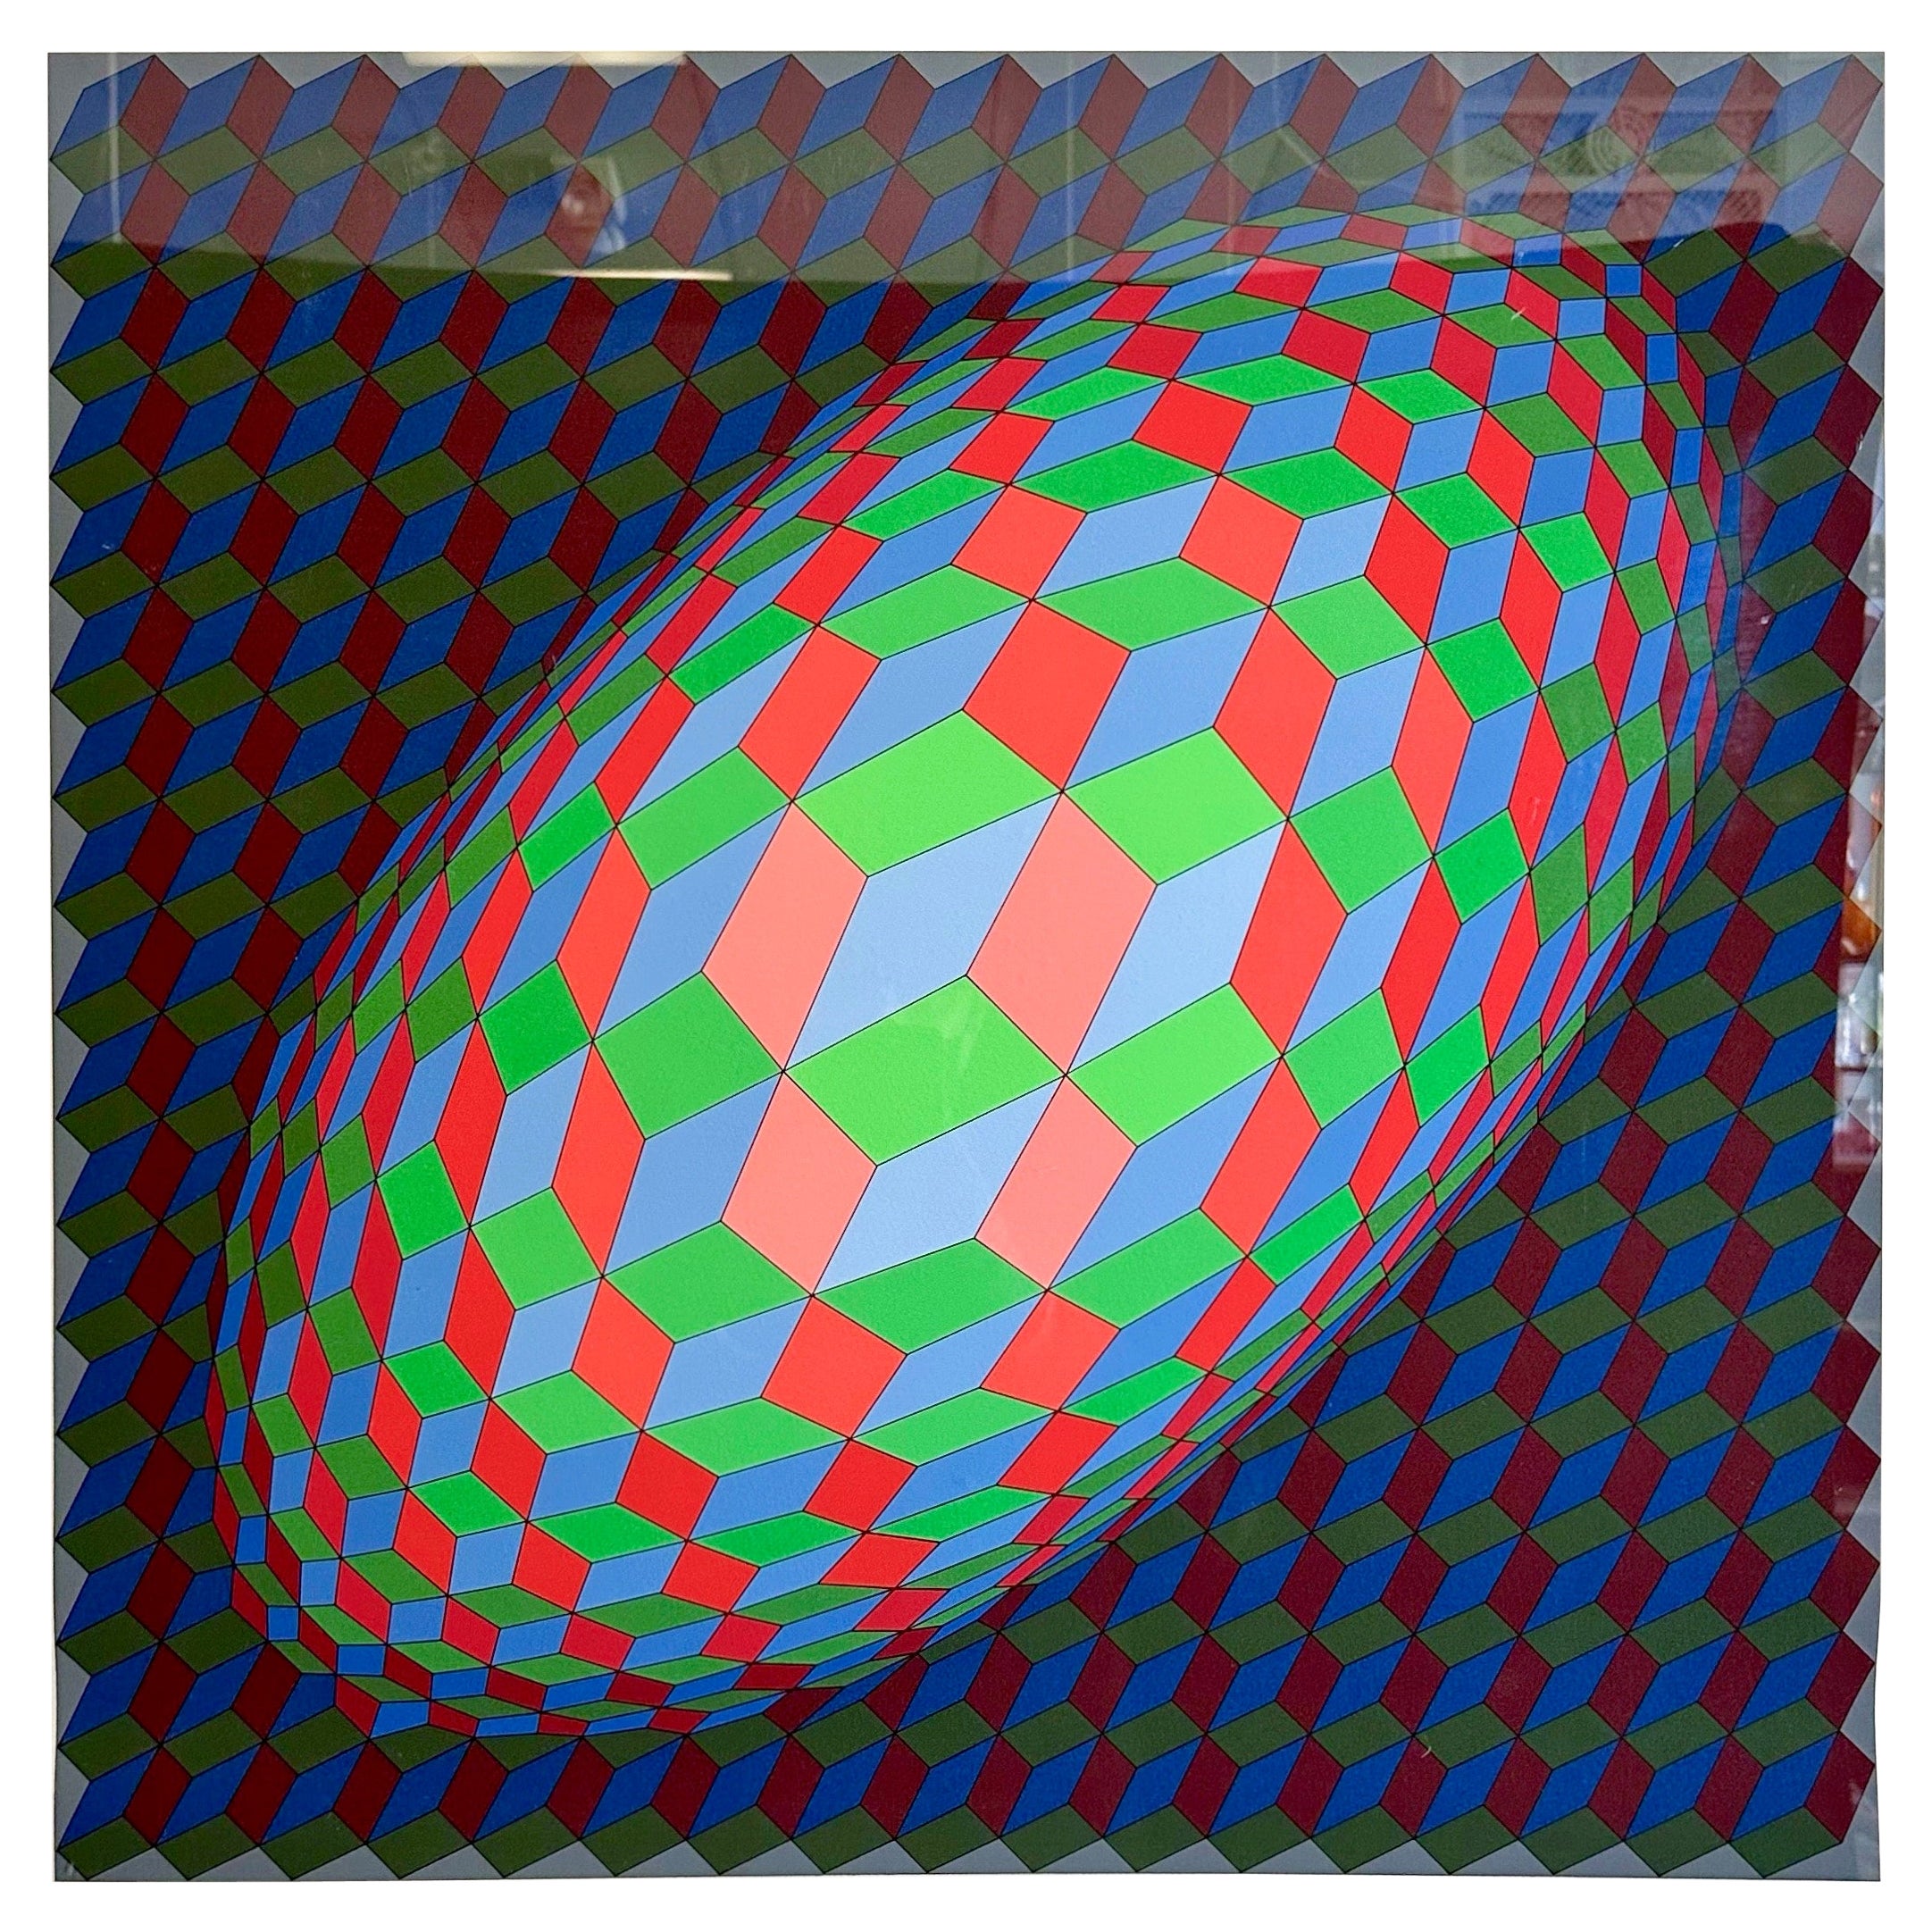 Victor Vasarely, “Torony III”, Op Art Serigraph, Signed and Numbered, 1970s